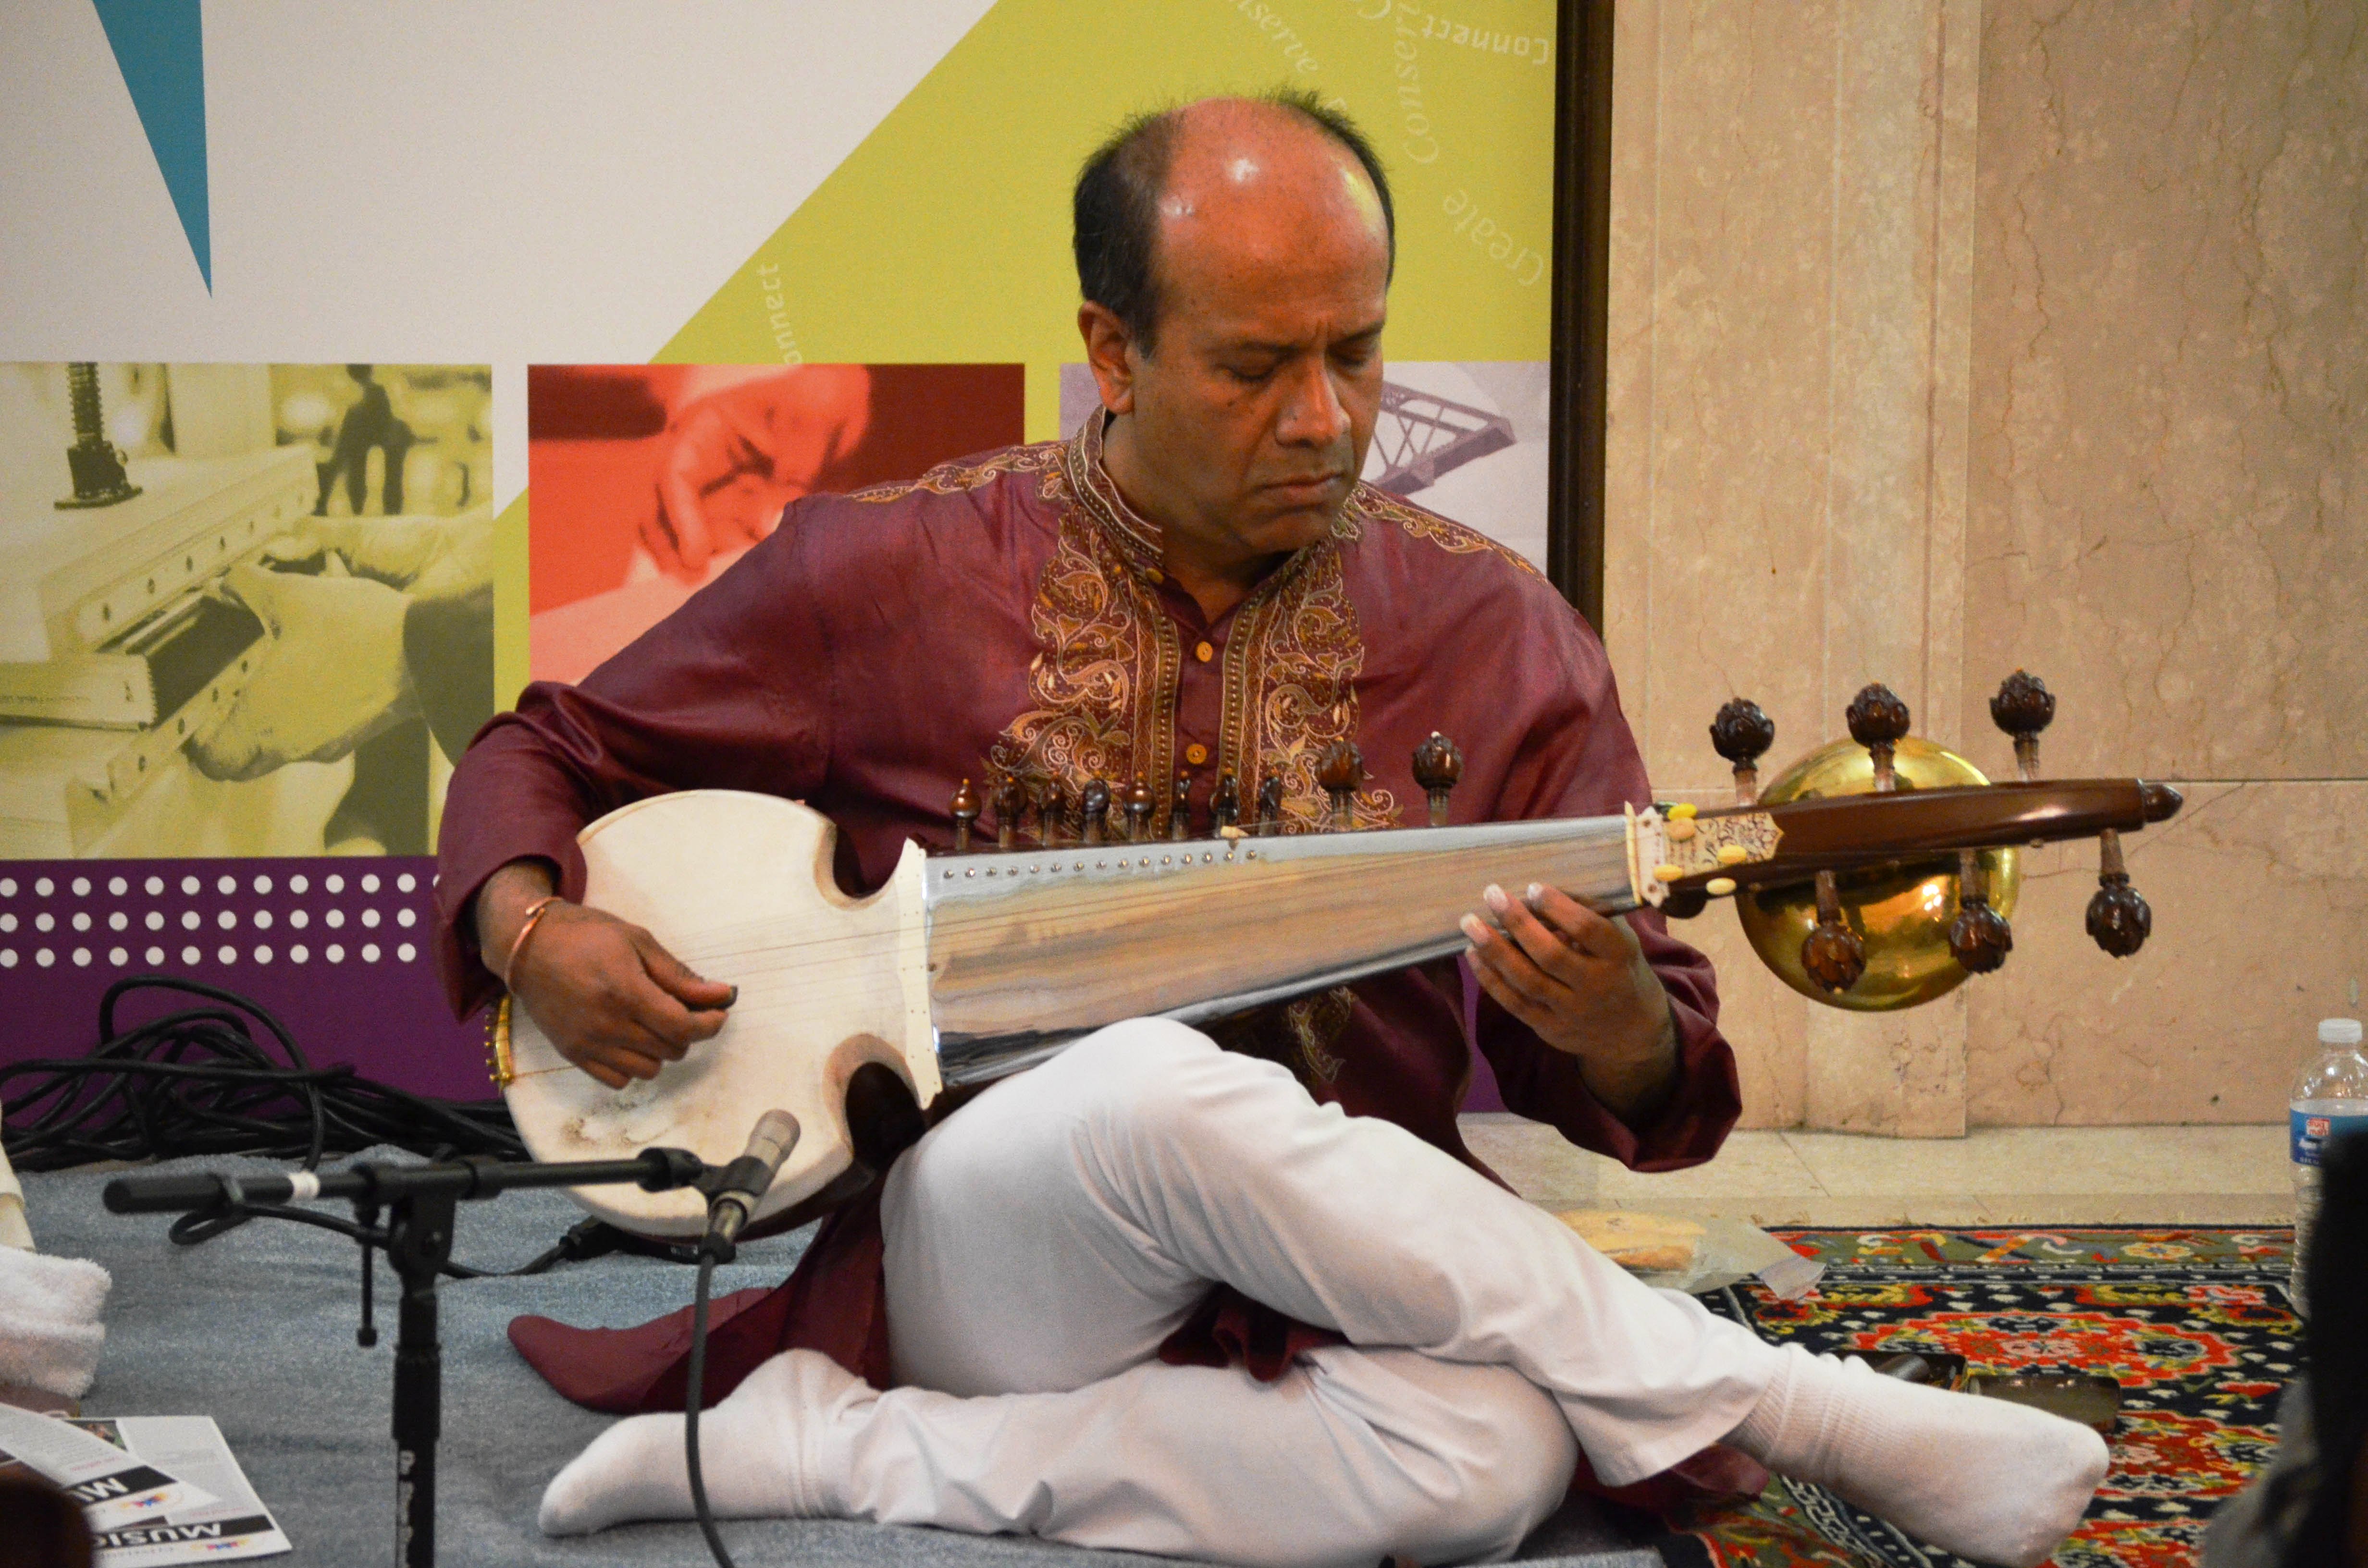 A man playing an instrument while sitting on the floor.